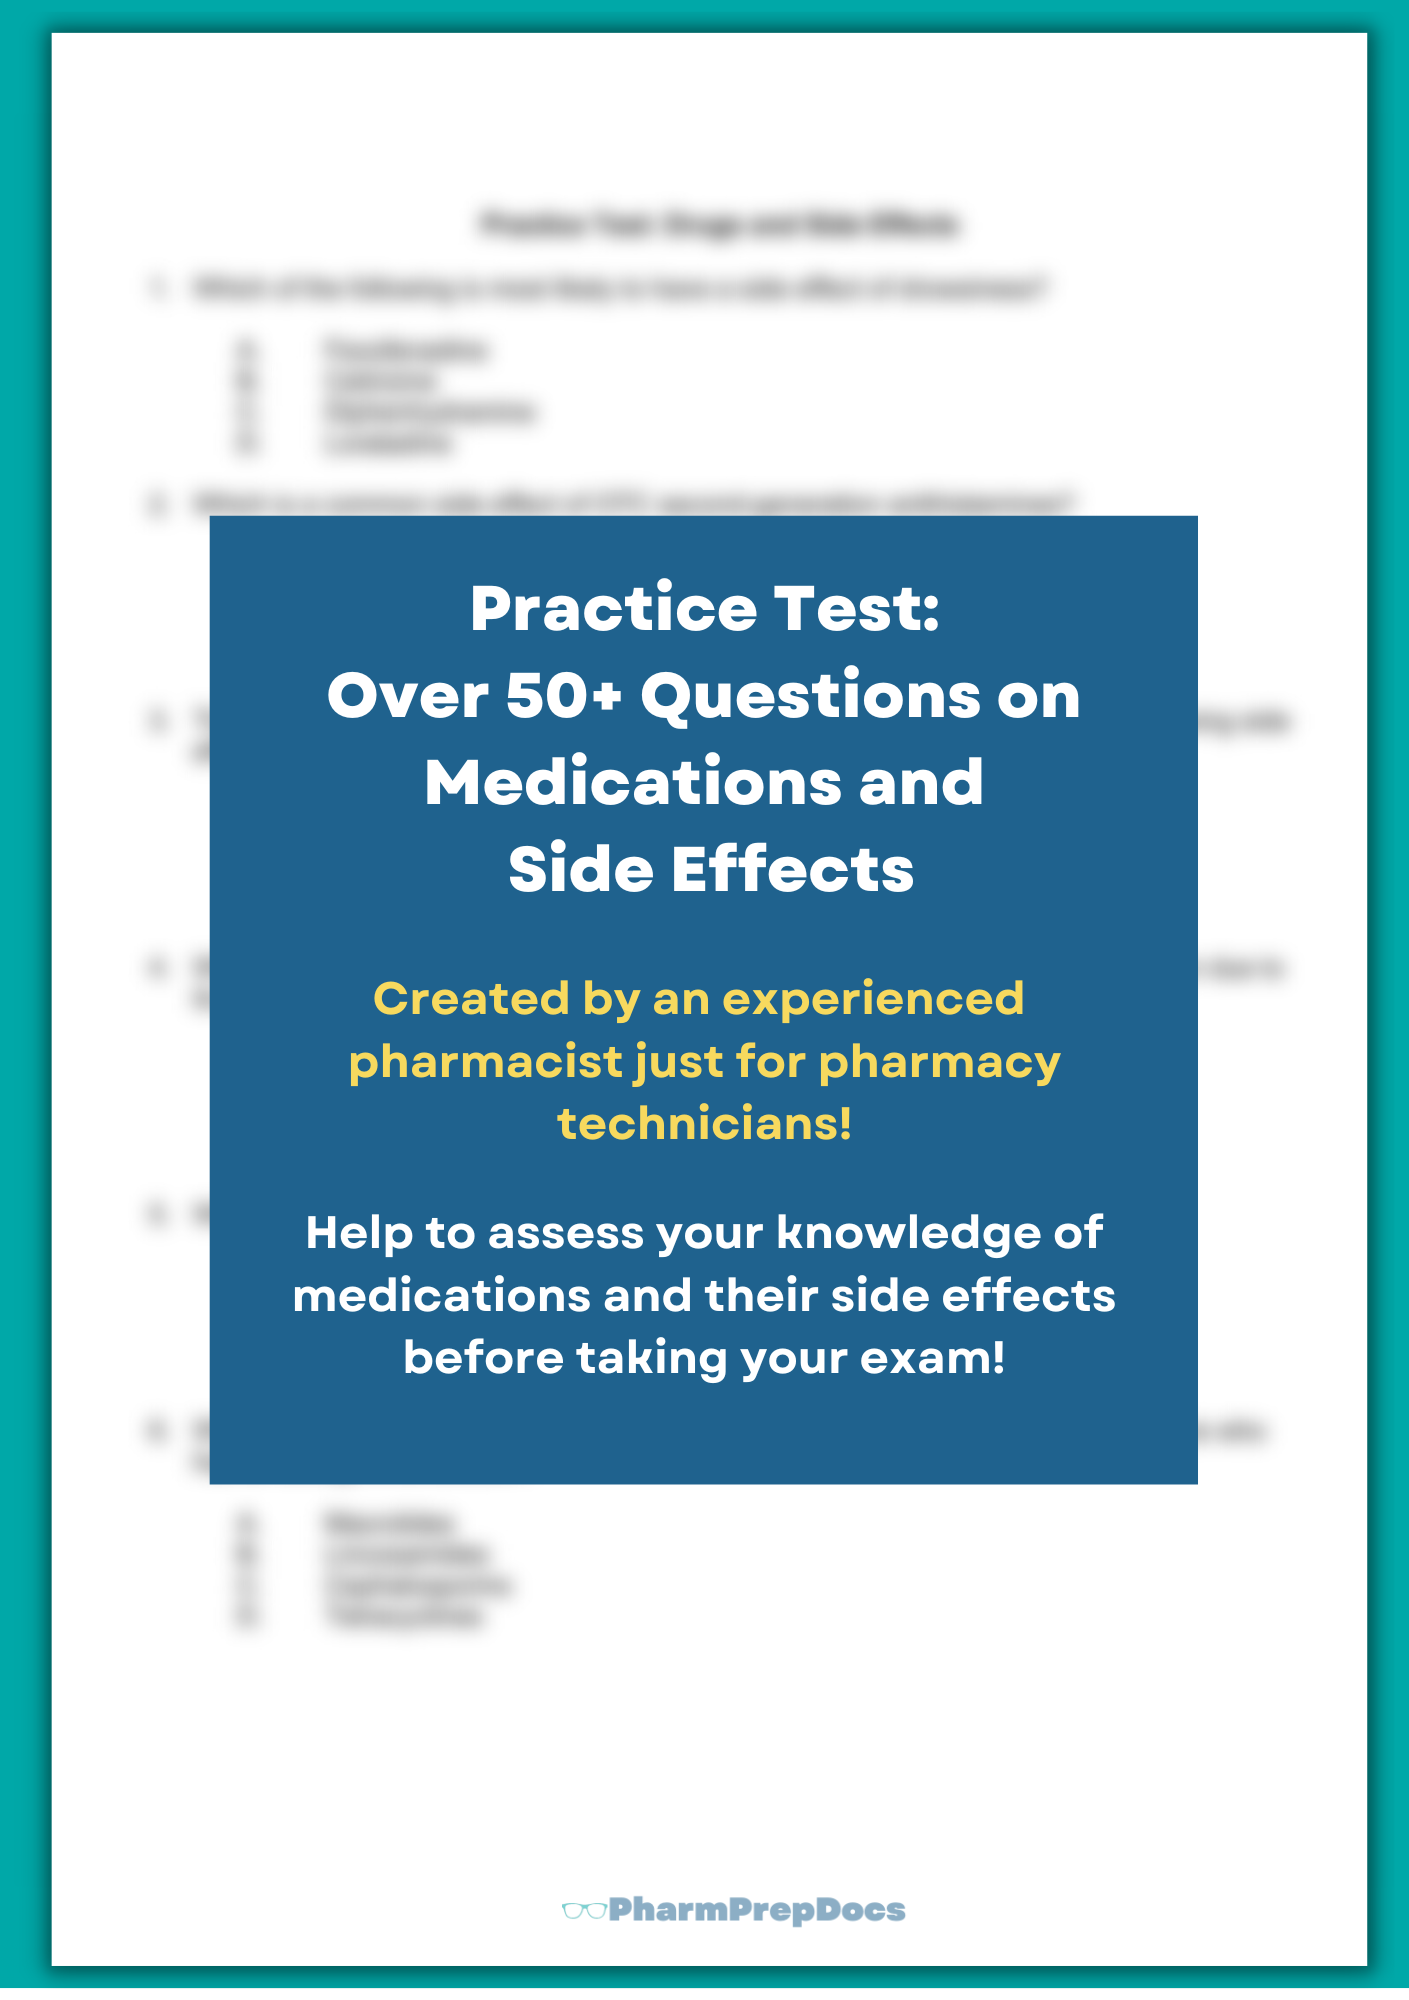 Practice Test: Medications and Side Effects